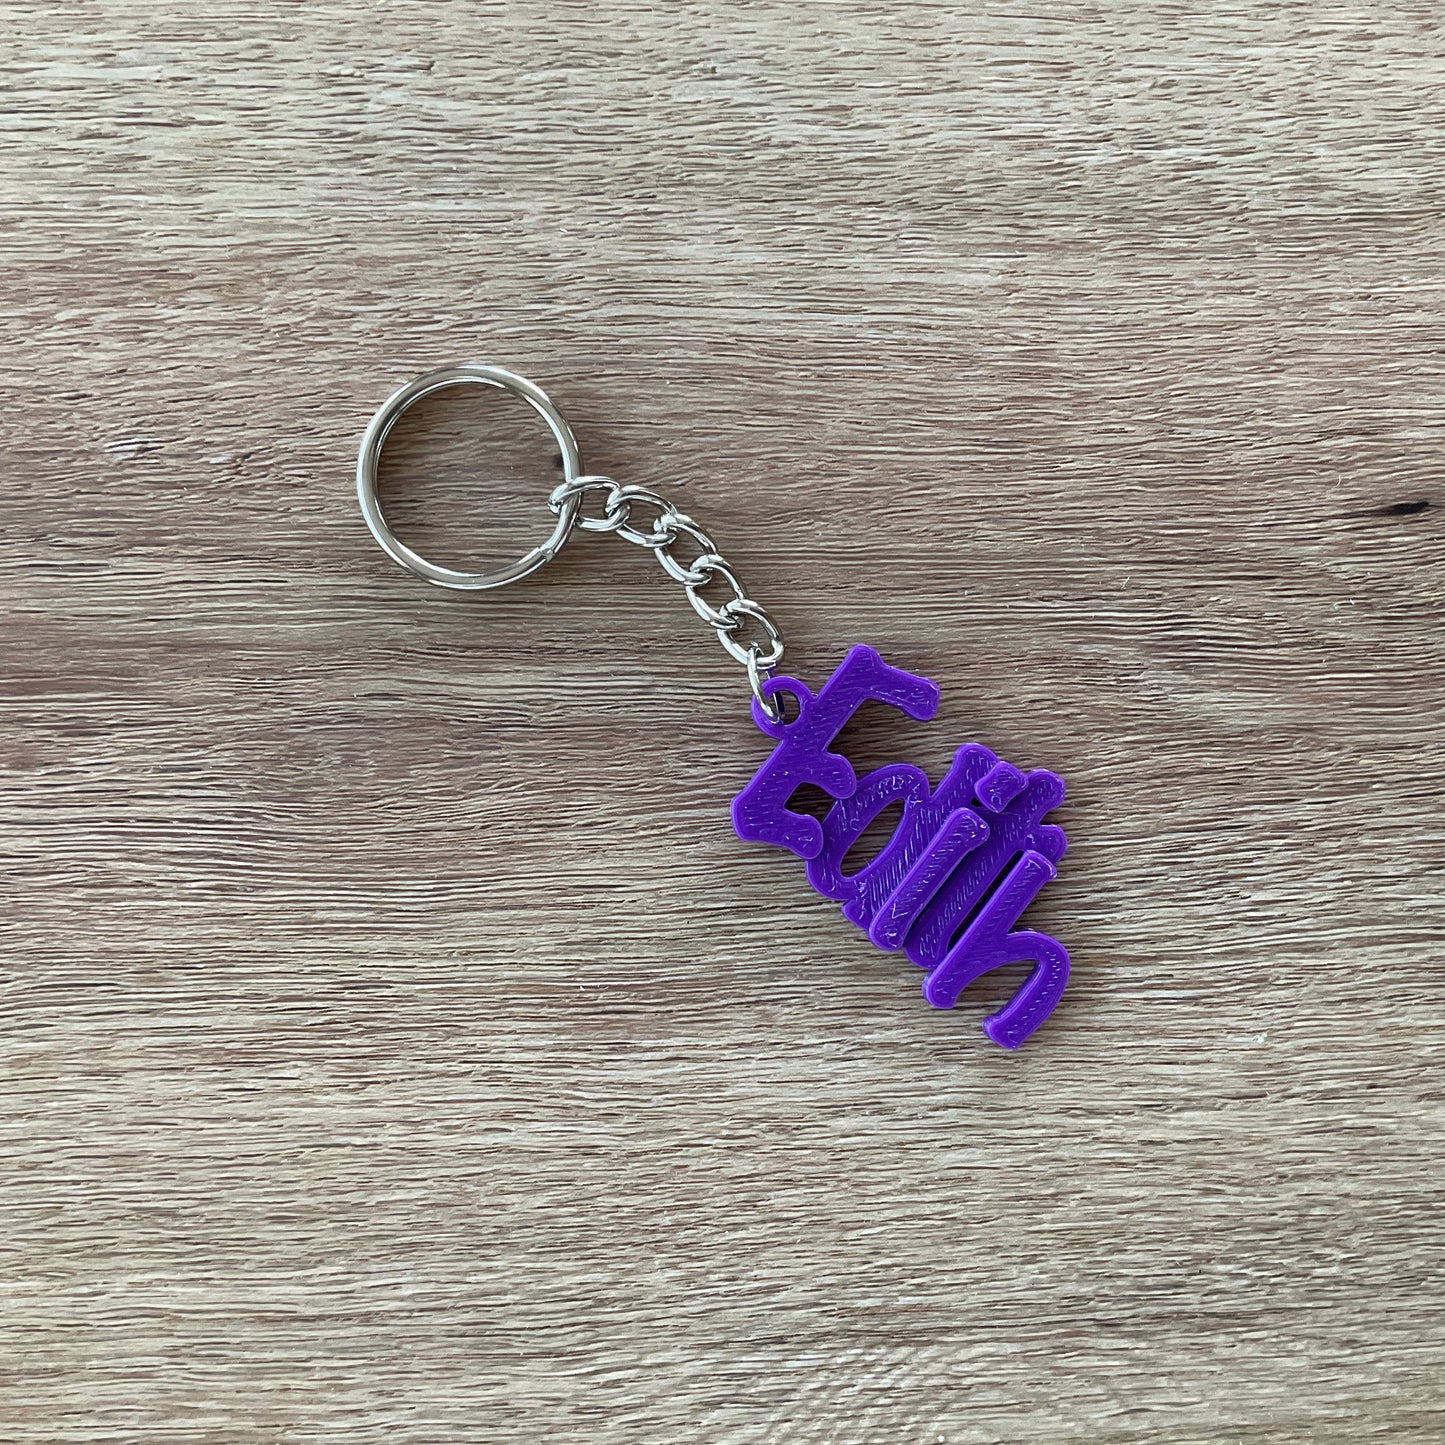 A sample image of the purple keychain.